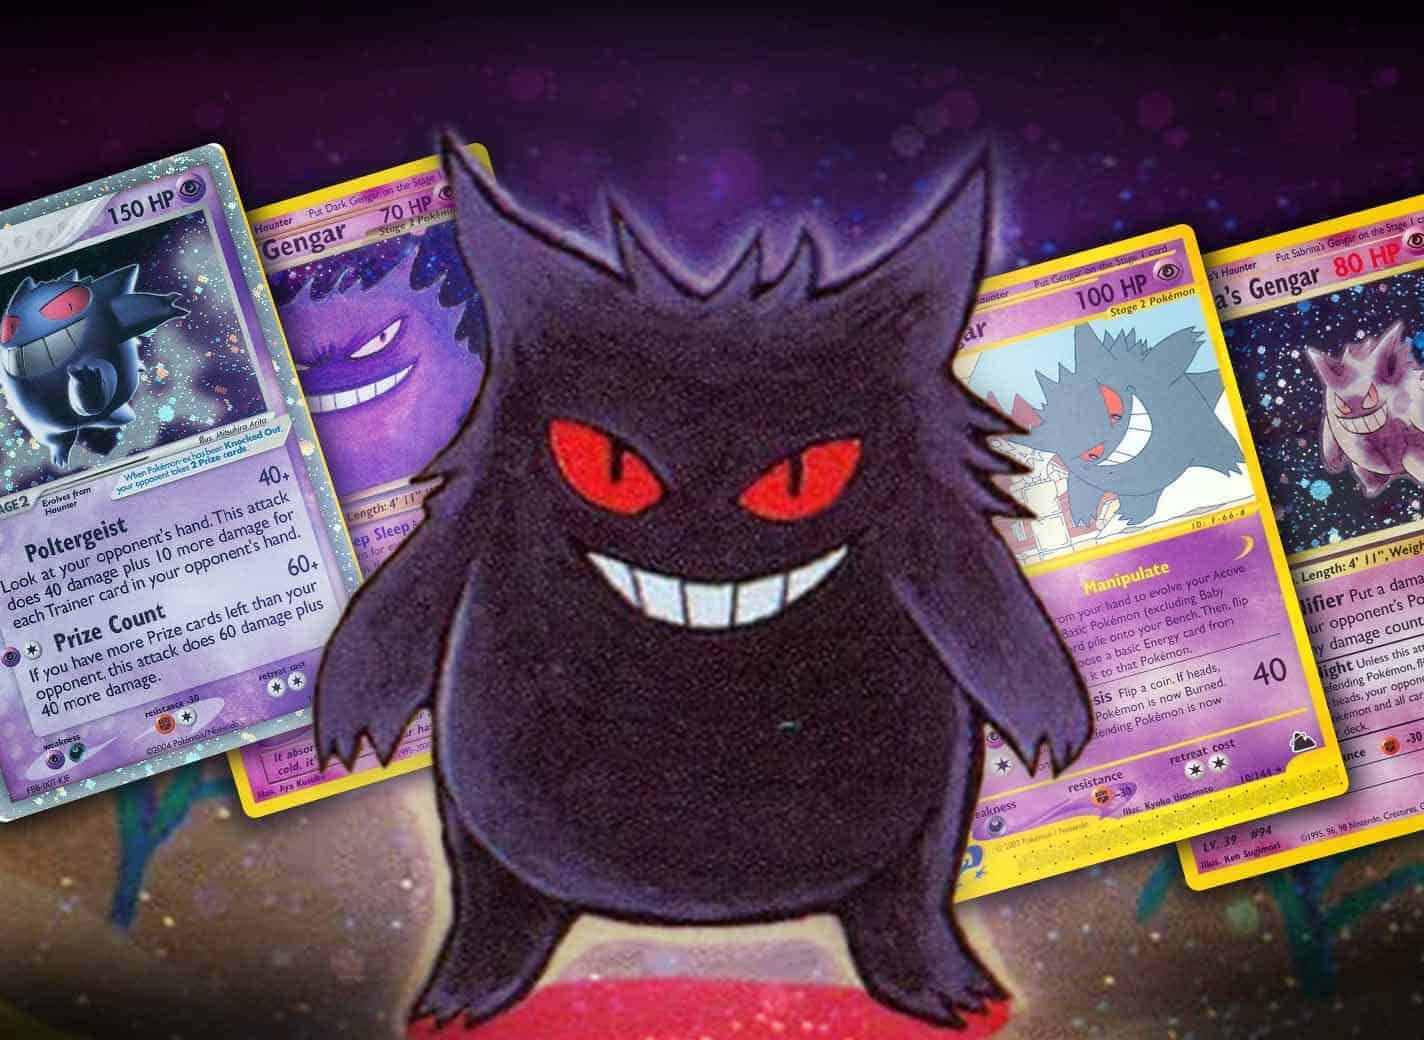 A menacing Gengar from the world of Pokémon!